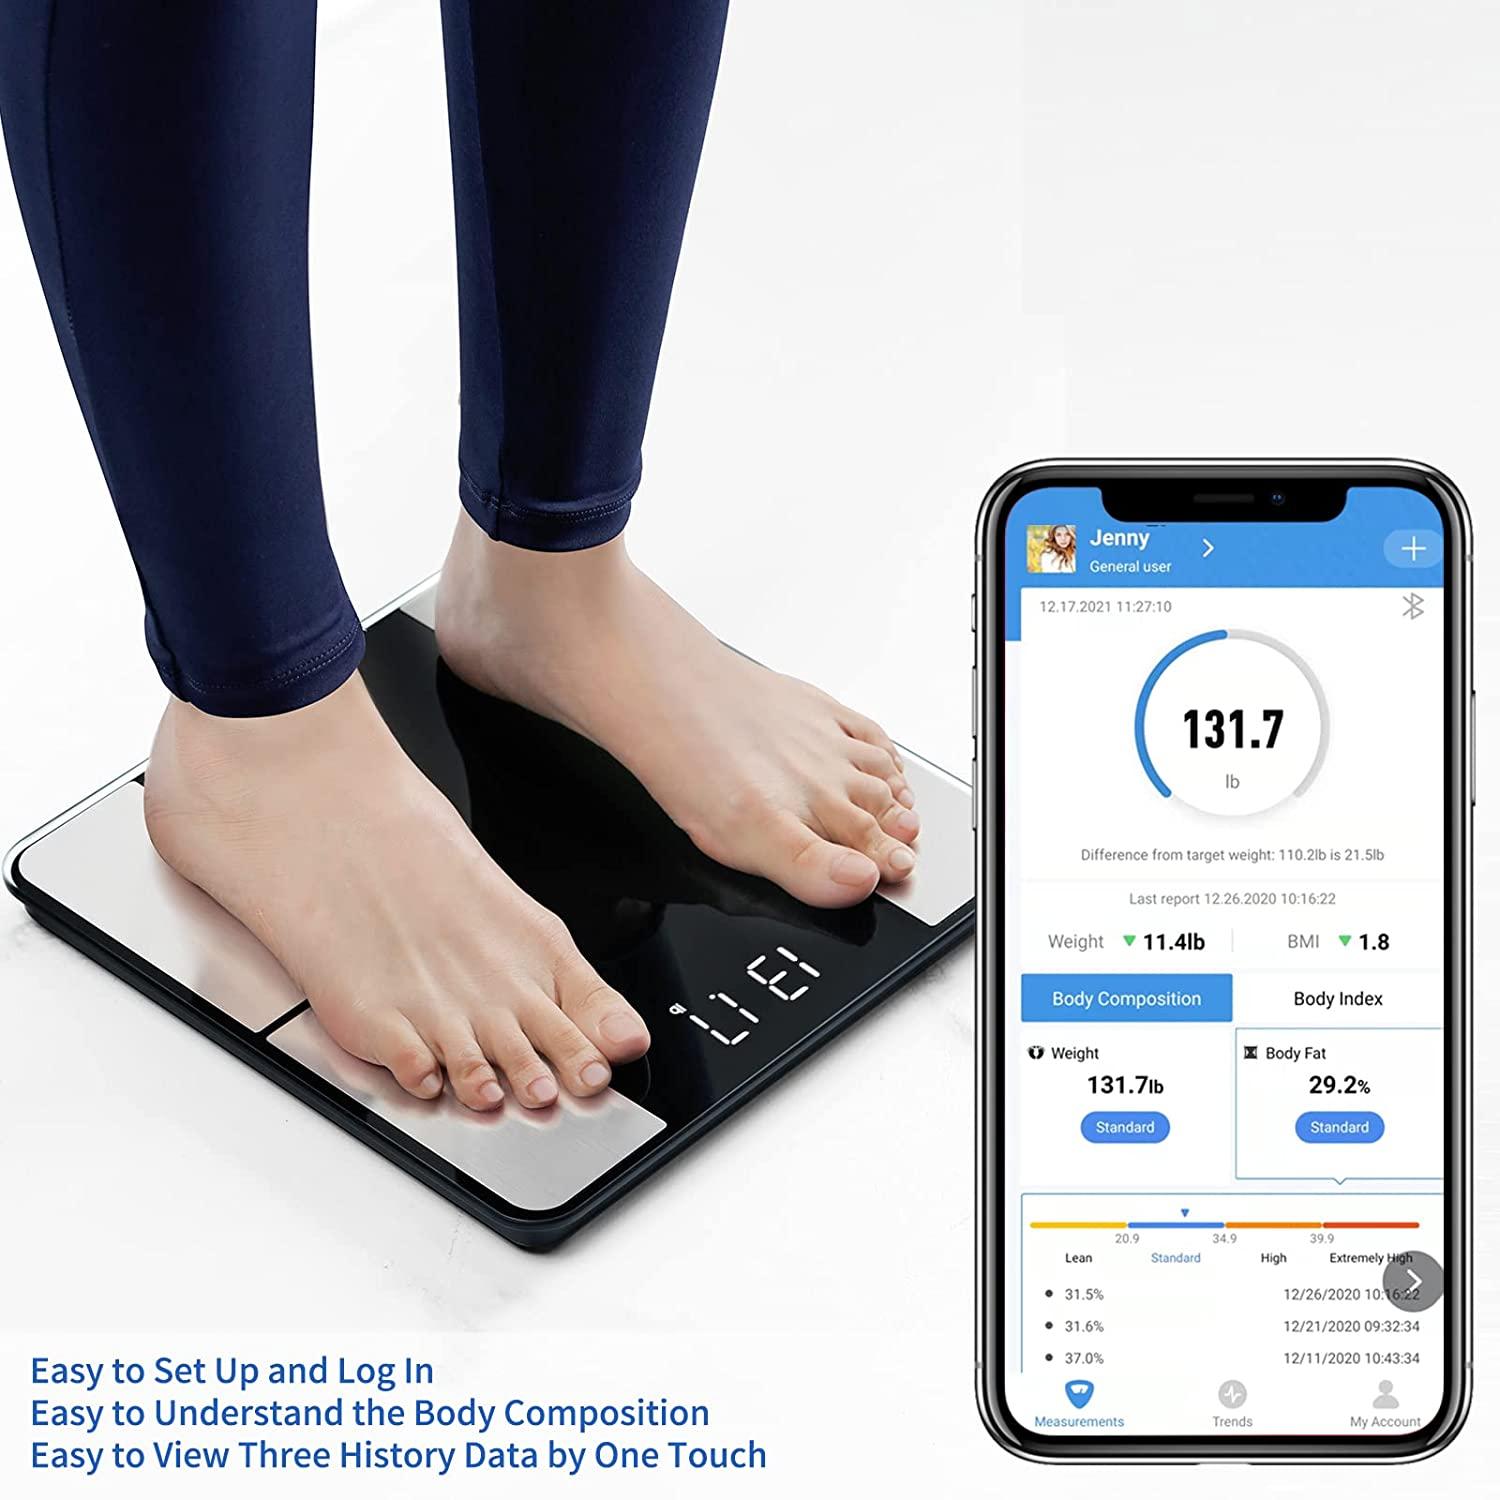 Vitafit Digital Bathroom Scale for Body Weight, Weighing Professional Since  2001, Clear LED Display and Step-On, 3*AAA Batteries Included